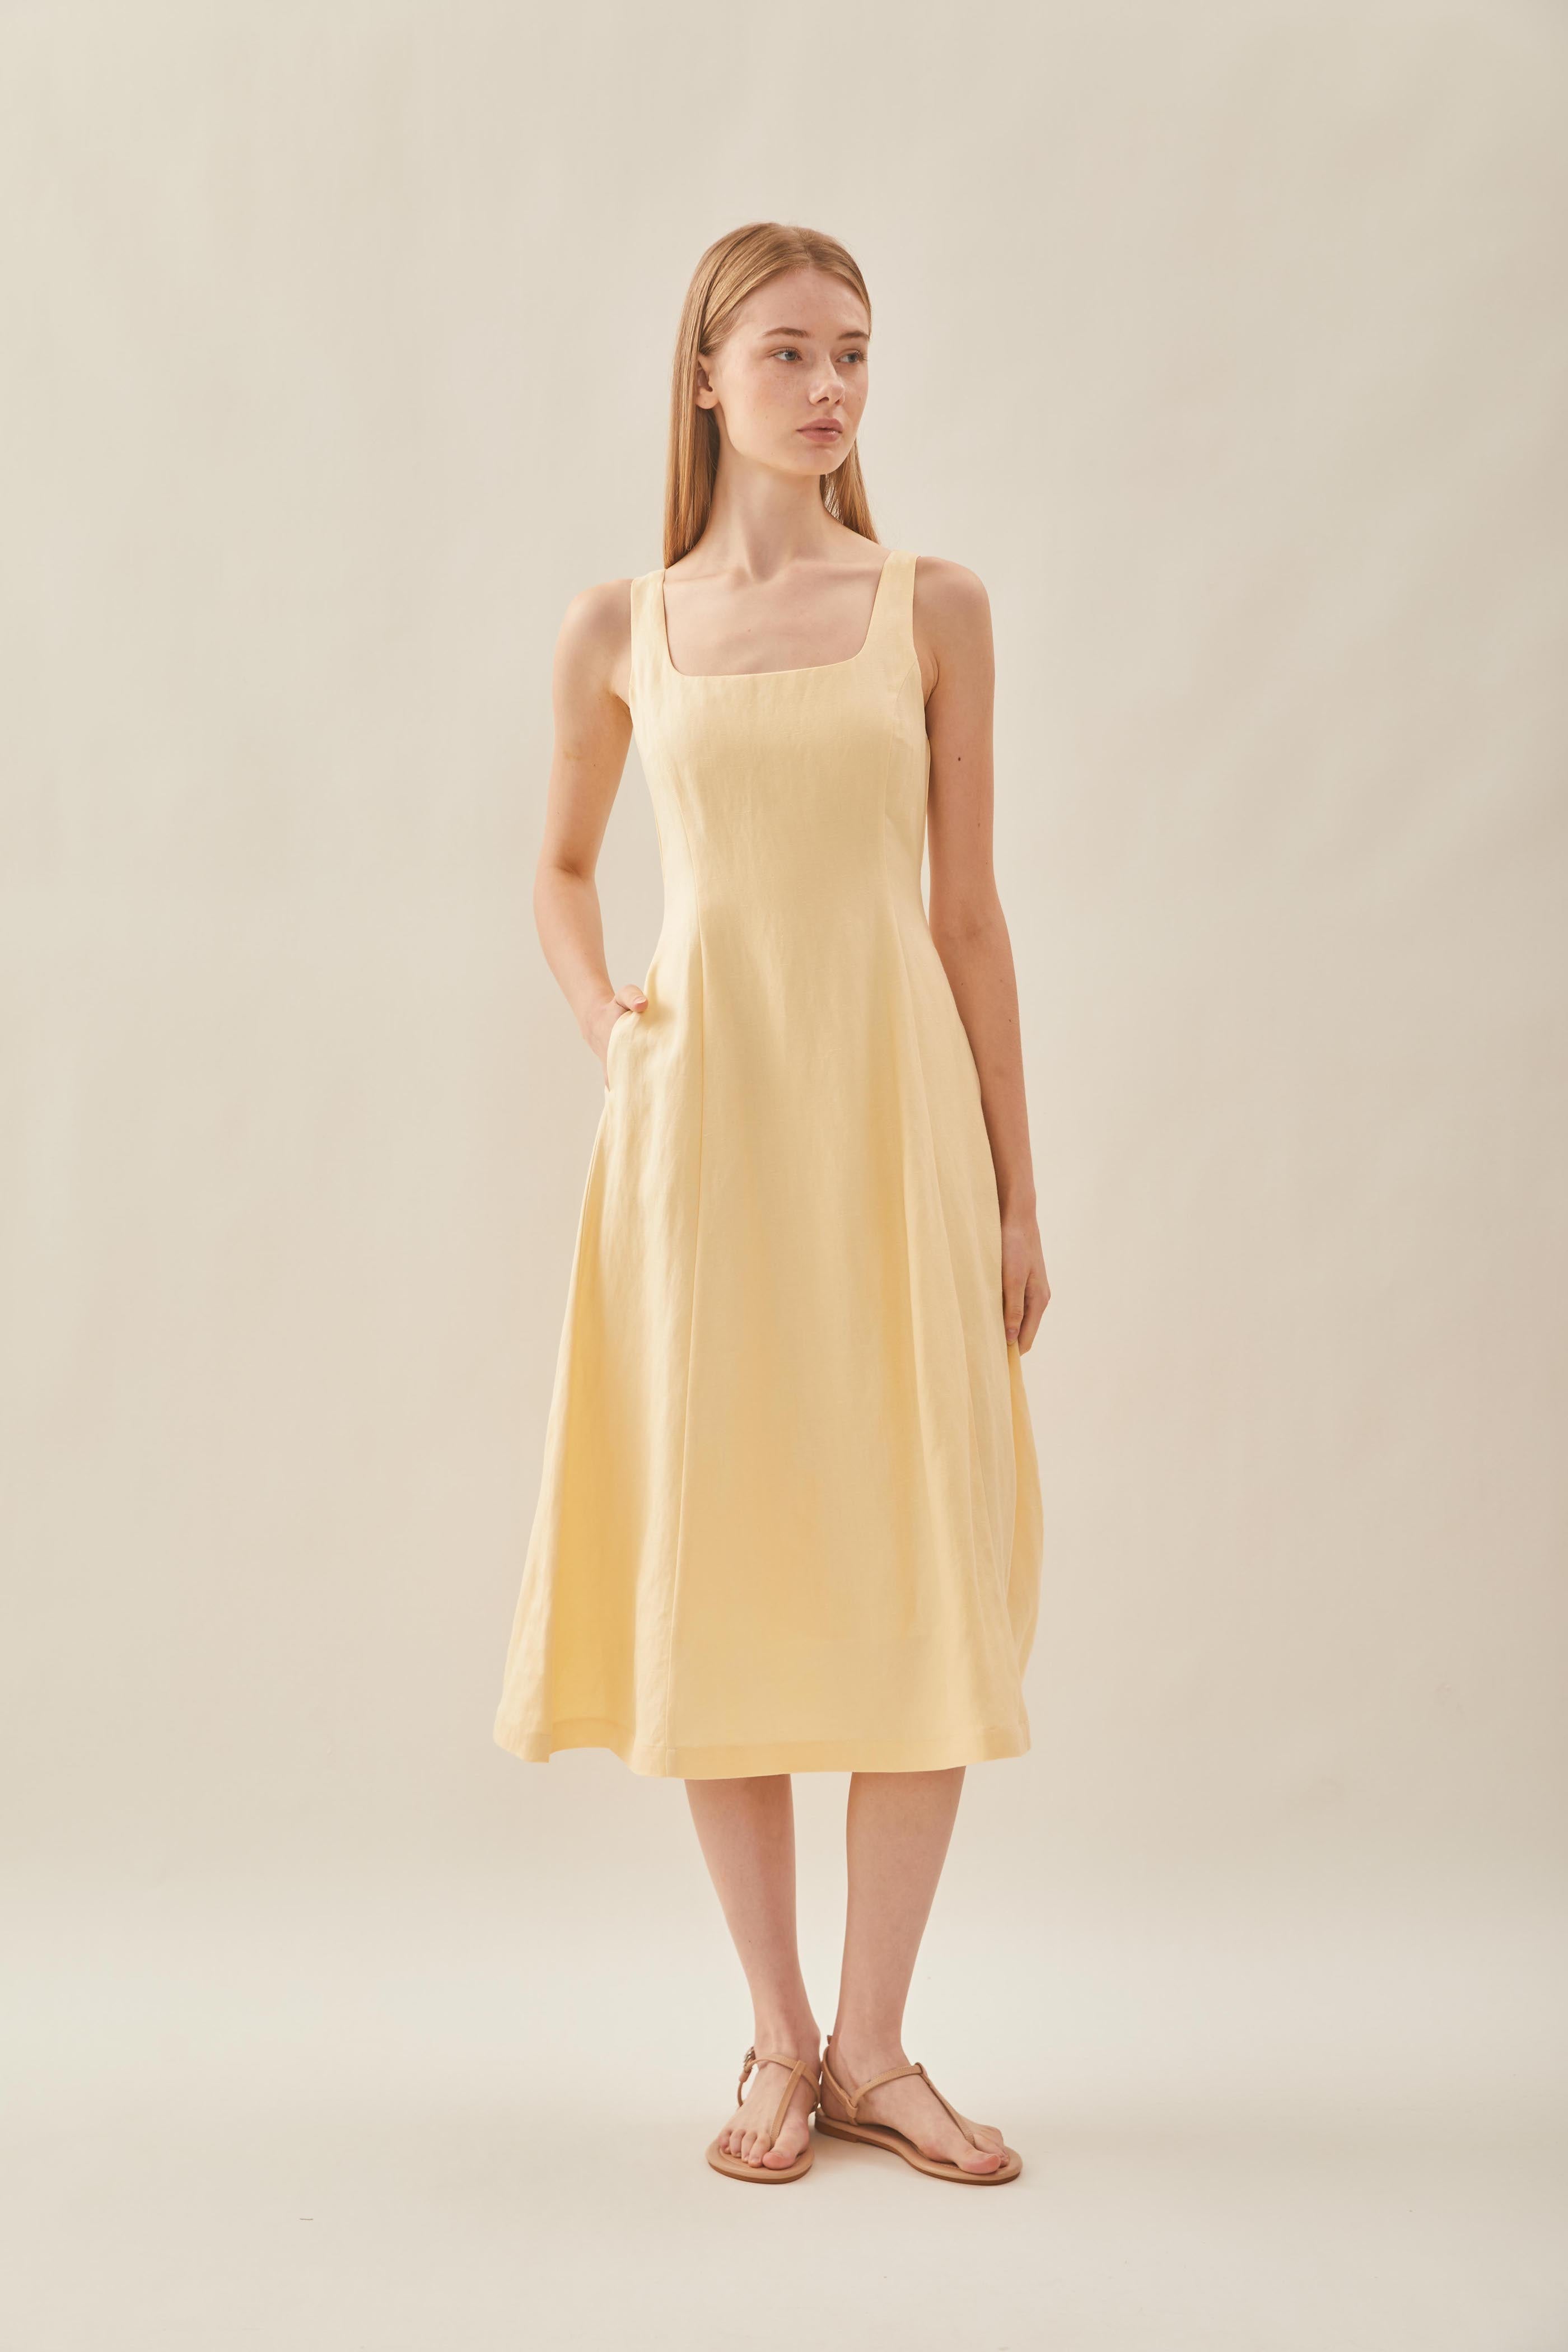 Scoop Neck Flare Dress in Pale Yellow